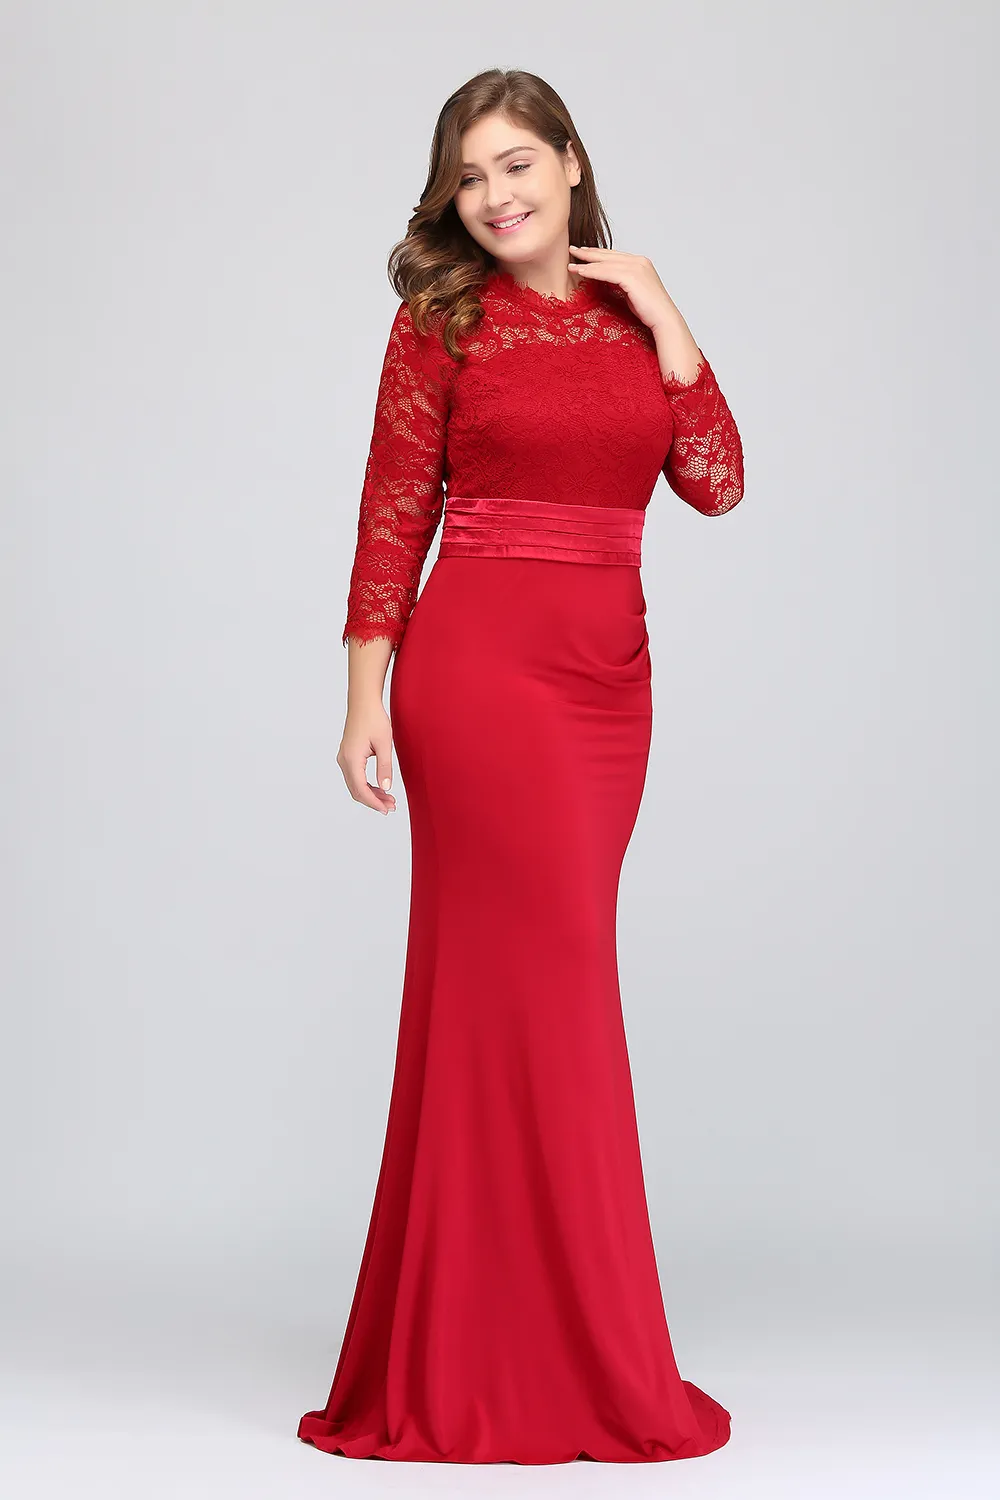 Plus Size 2018 Real Pictures Cheap Bridesmaid Dresses Long Chiffon ALine Formal Dresses Modest Special Occasion Evening Gowns CPS9871545